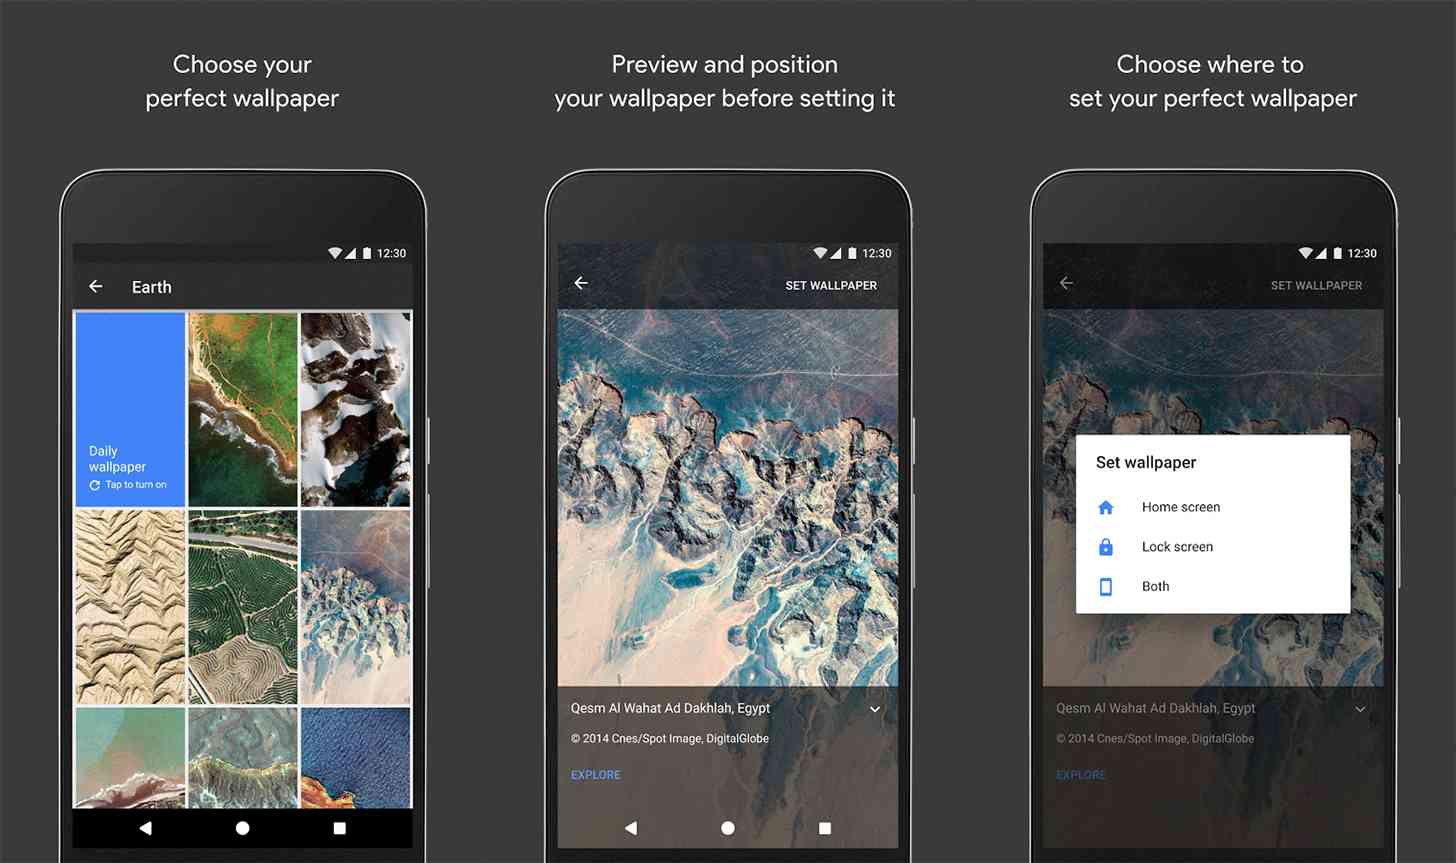 Google Wallpapers Android app features